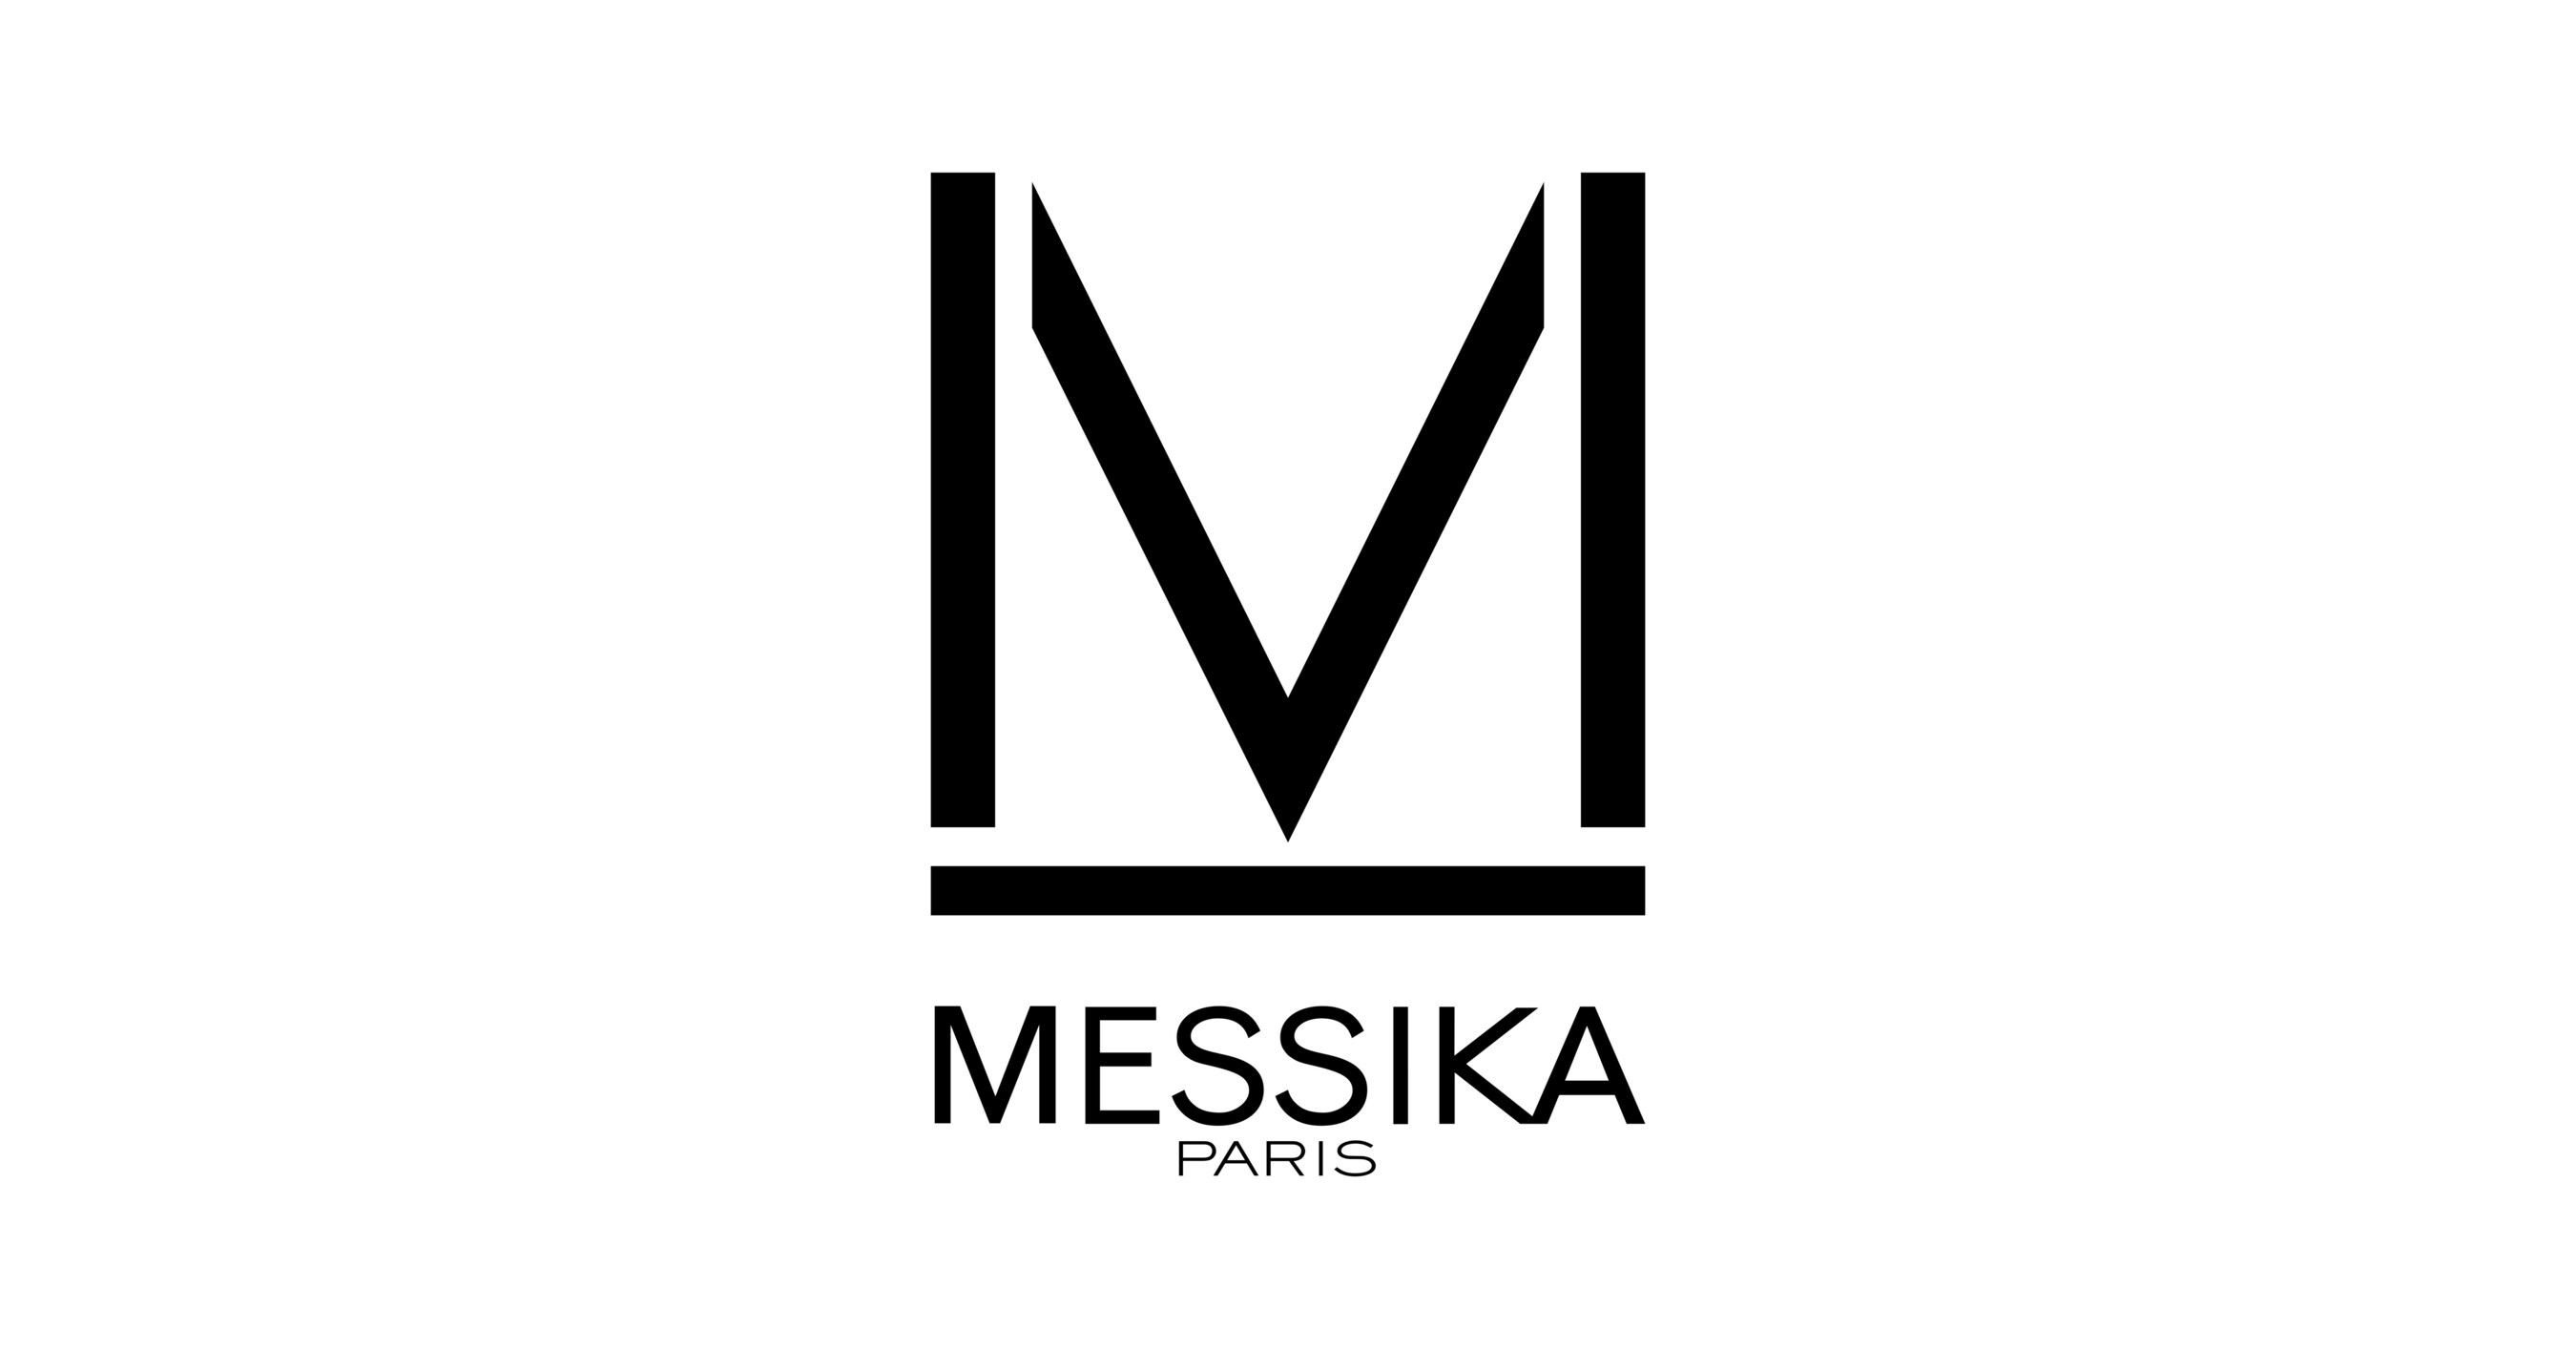 THE MESSIKA HIGH JEWELRY SHOW LIGHTS UP FASHION WEEK